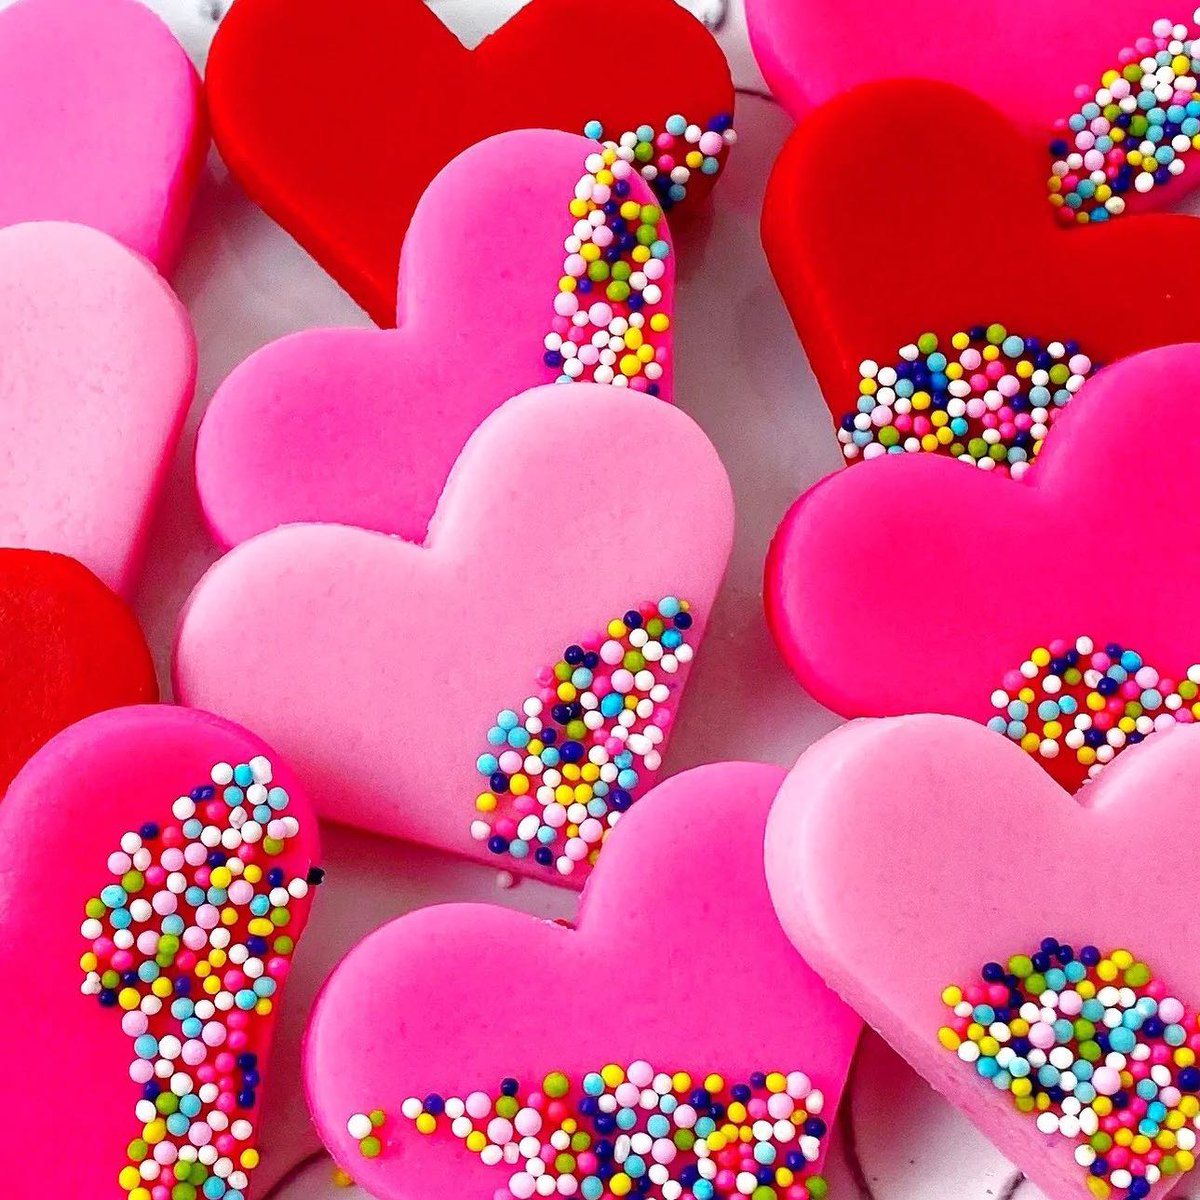 You can never have too much red, too much pink, or too many sprinkles for Valentine’s Day! ❤️💖 #candyhearts
.
.
.
#marzipops #marzipan #candy #vegan #vegancandy #glutenfree #sweettreats #vegetarian #candies ...